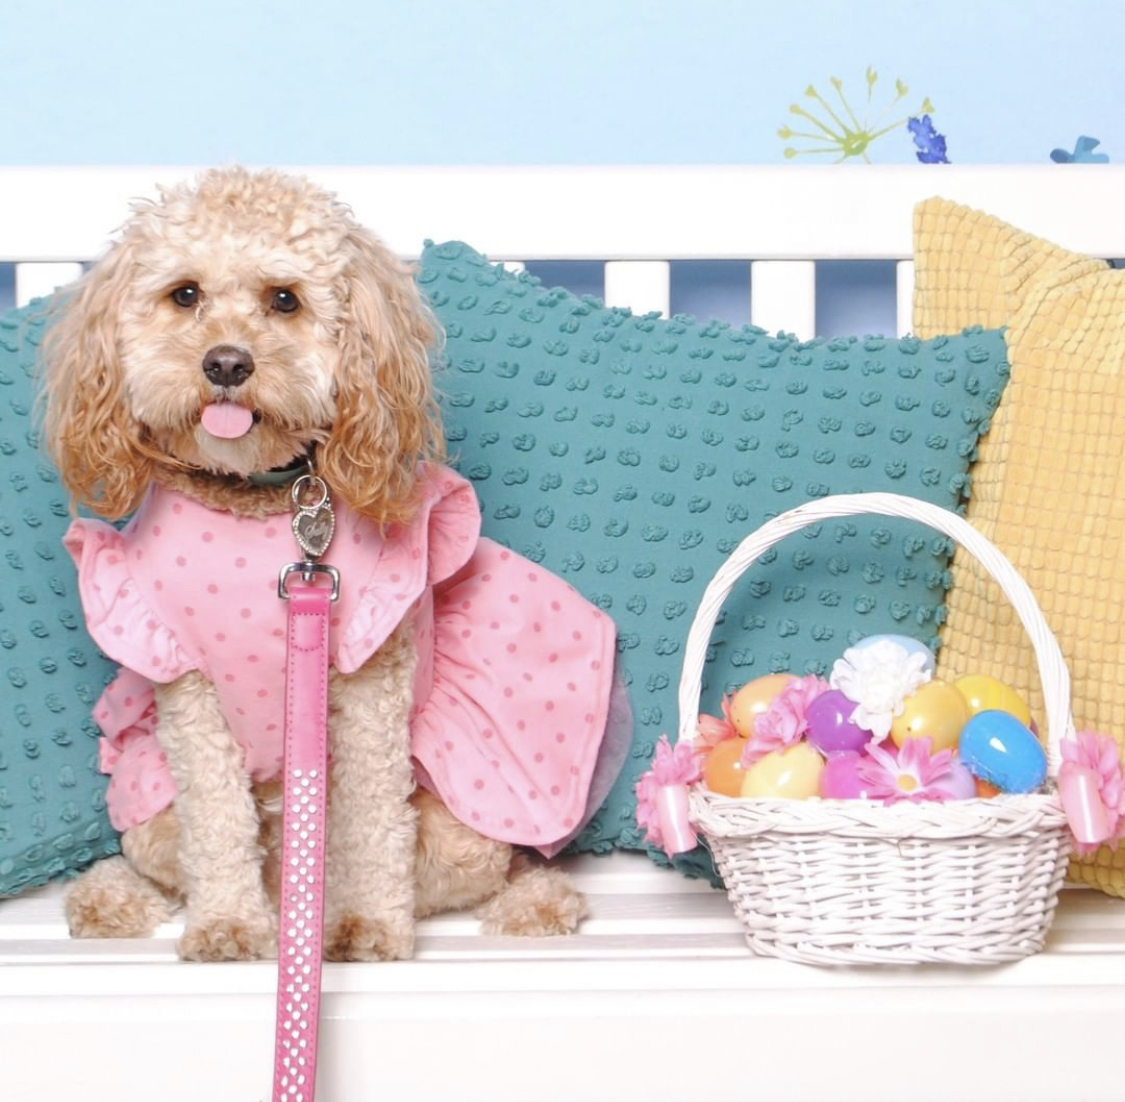 dog sitting on spring bench with pillows and easter basket